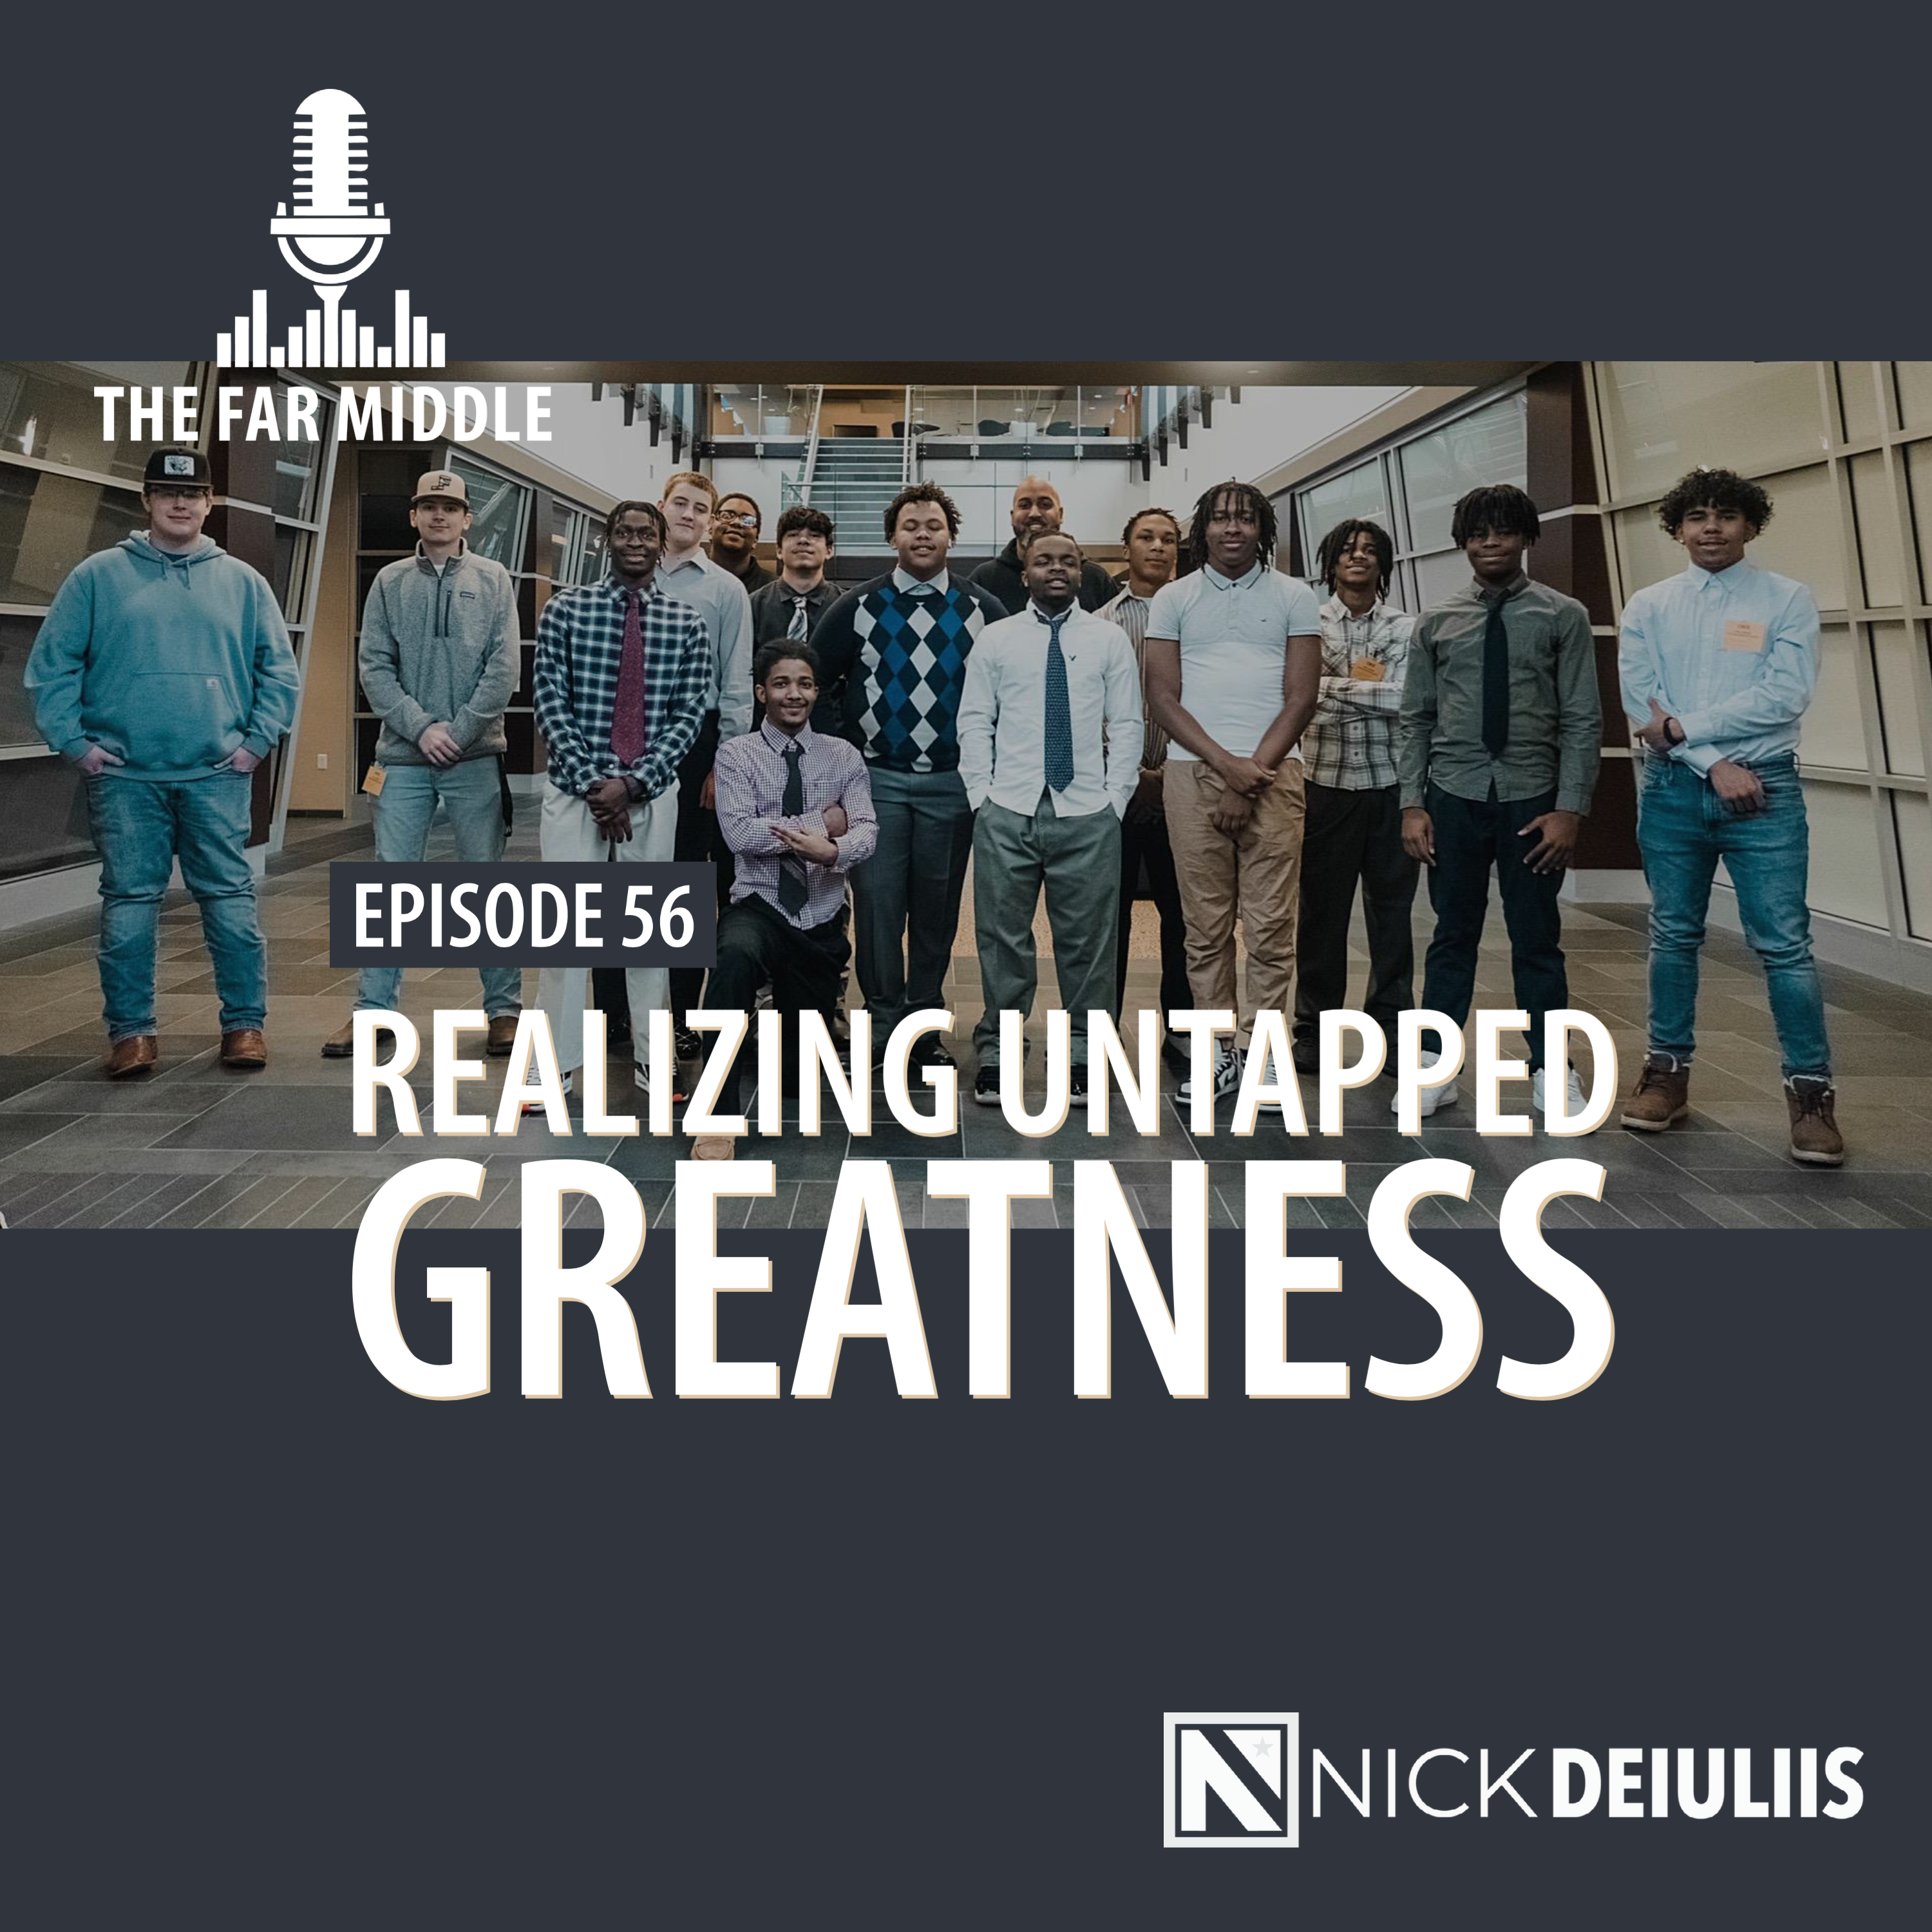 Realizing Untapped Greatness